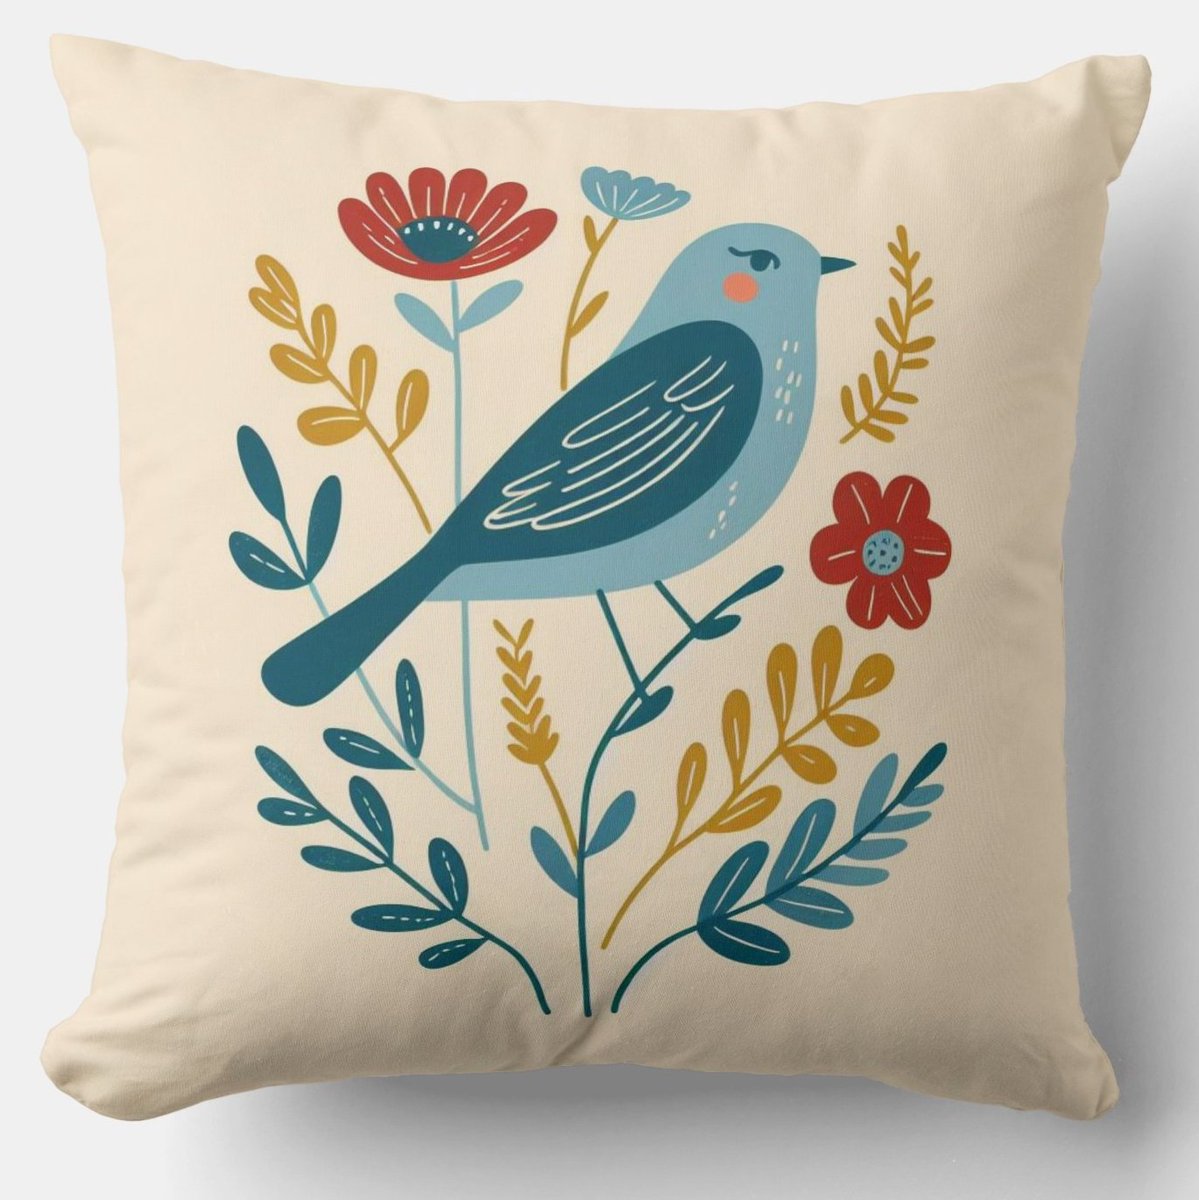 Good Thursday! Serene Blue Bird Floral Throw #Pillow zazzle.com/serene_blue_bi… vi @zazzle #pillows #ThrowPillow #personalized #Personalization #custompillow #personalizedpillow #uniquehome #personalisedgifts #personalizedgifts #floralart  #modernhome #thursdayvibes
#thursdaymorning